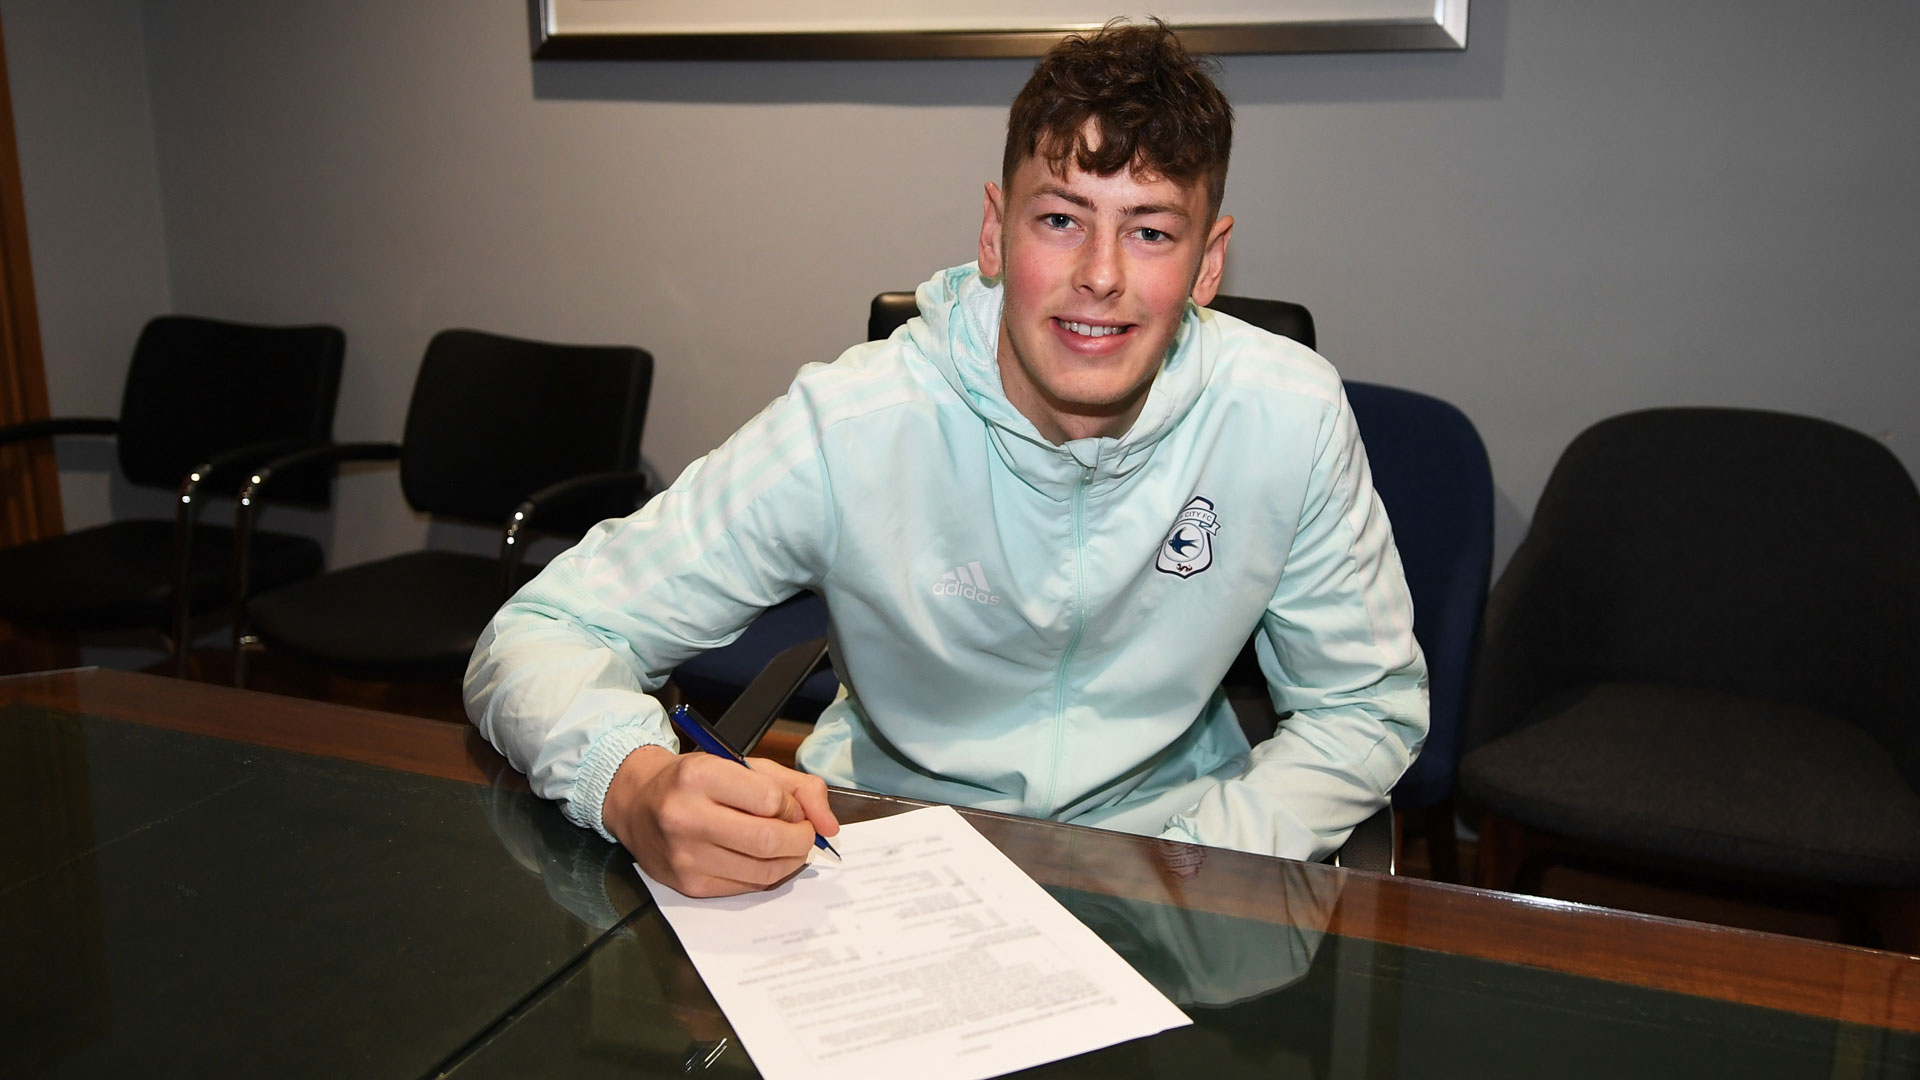 Oliver Denham has signed a new contract with the Bluebirds...